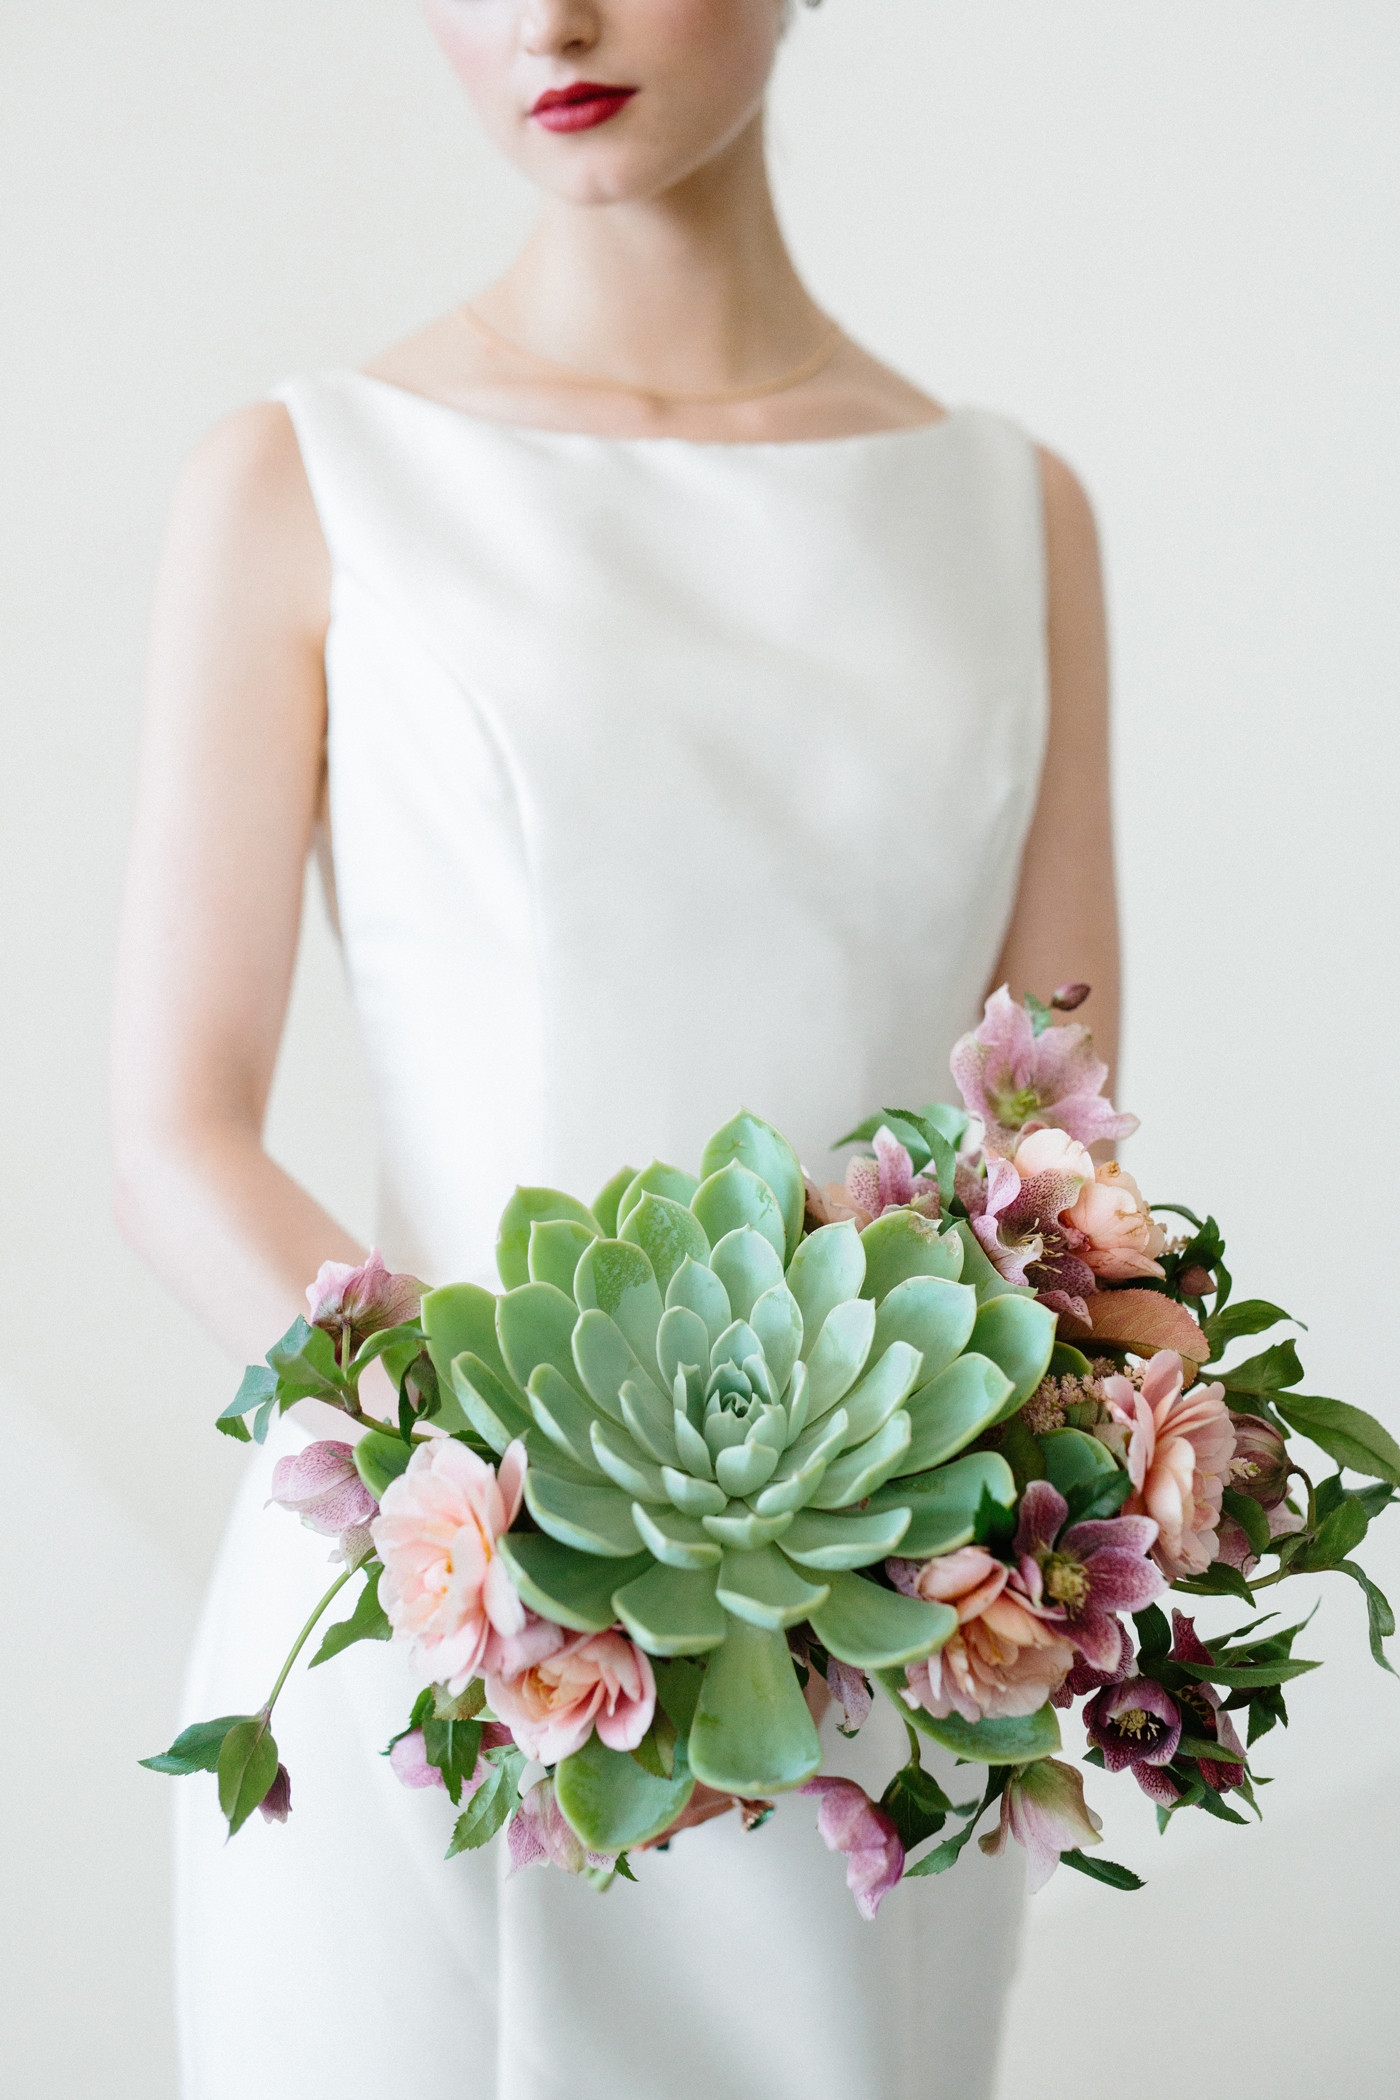 Modern Wedding Flowers
 20 Succulent Wedding Bouquets Perfect for the Boho Bride